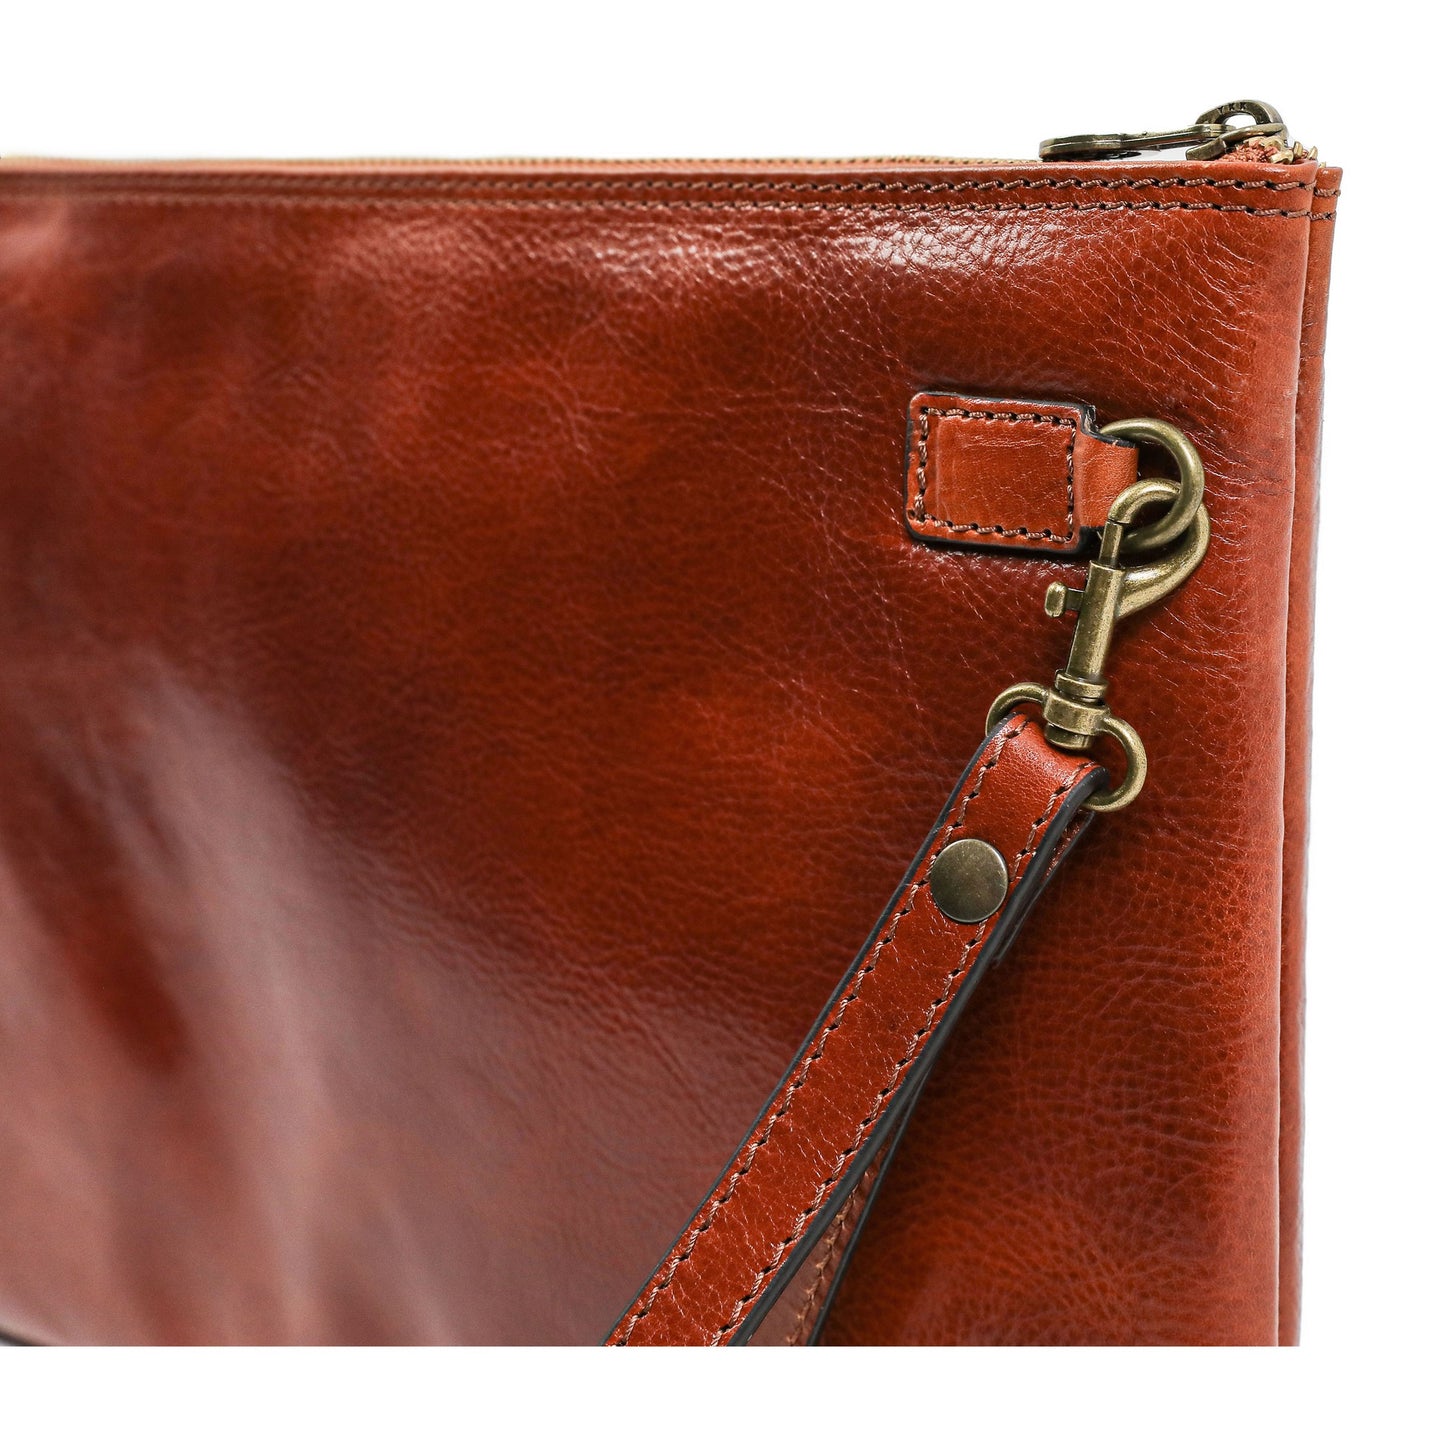 Large Leather Mens Clutch Purse - The Brothers Karamazov